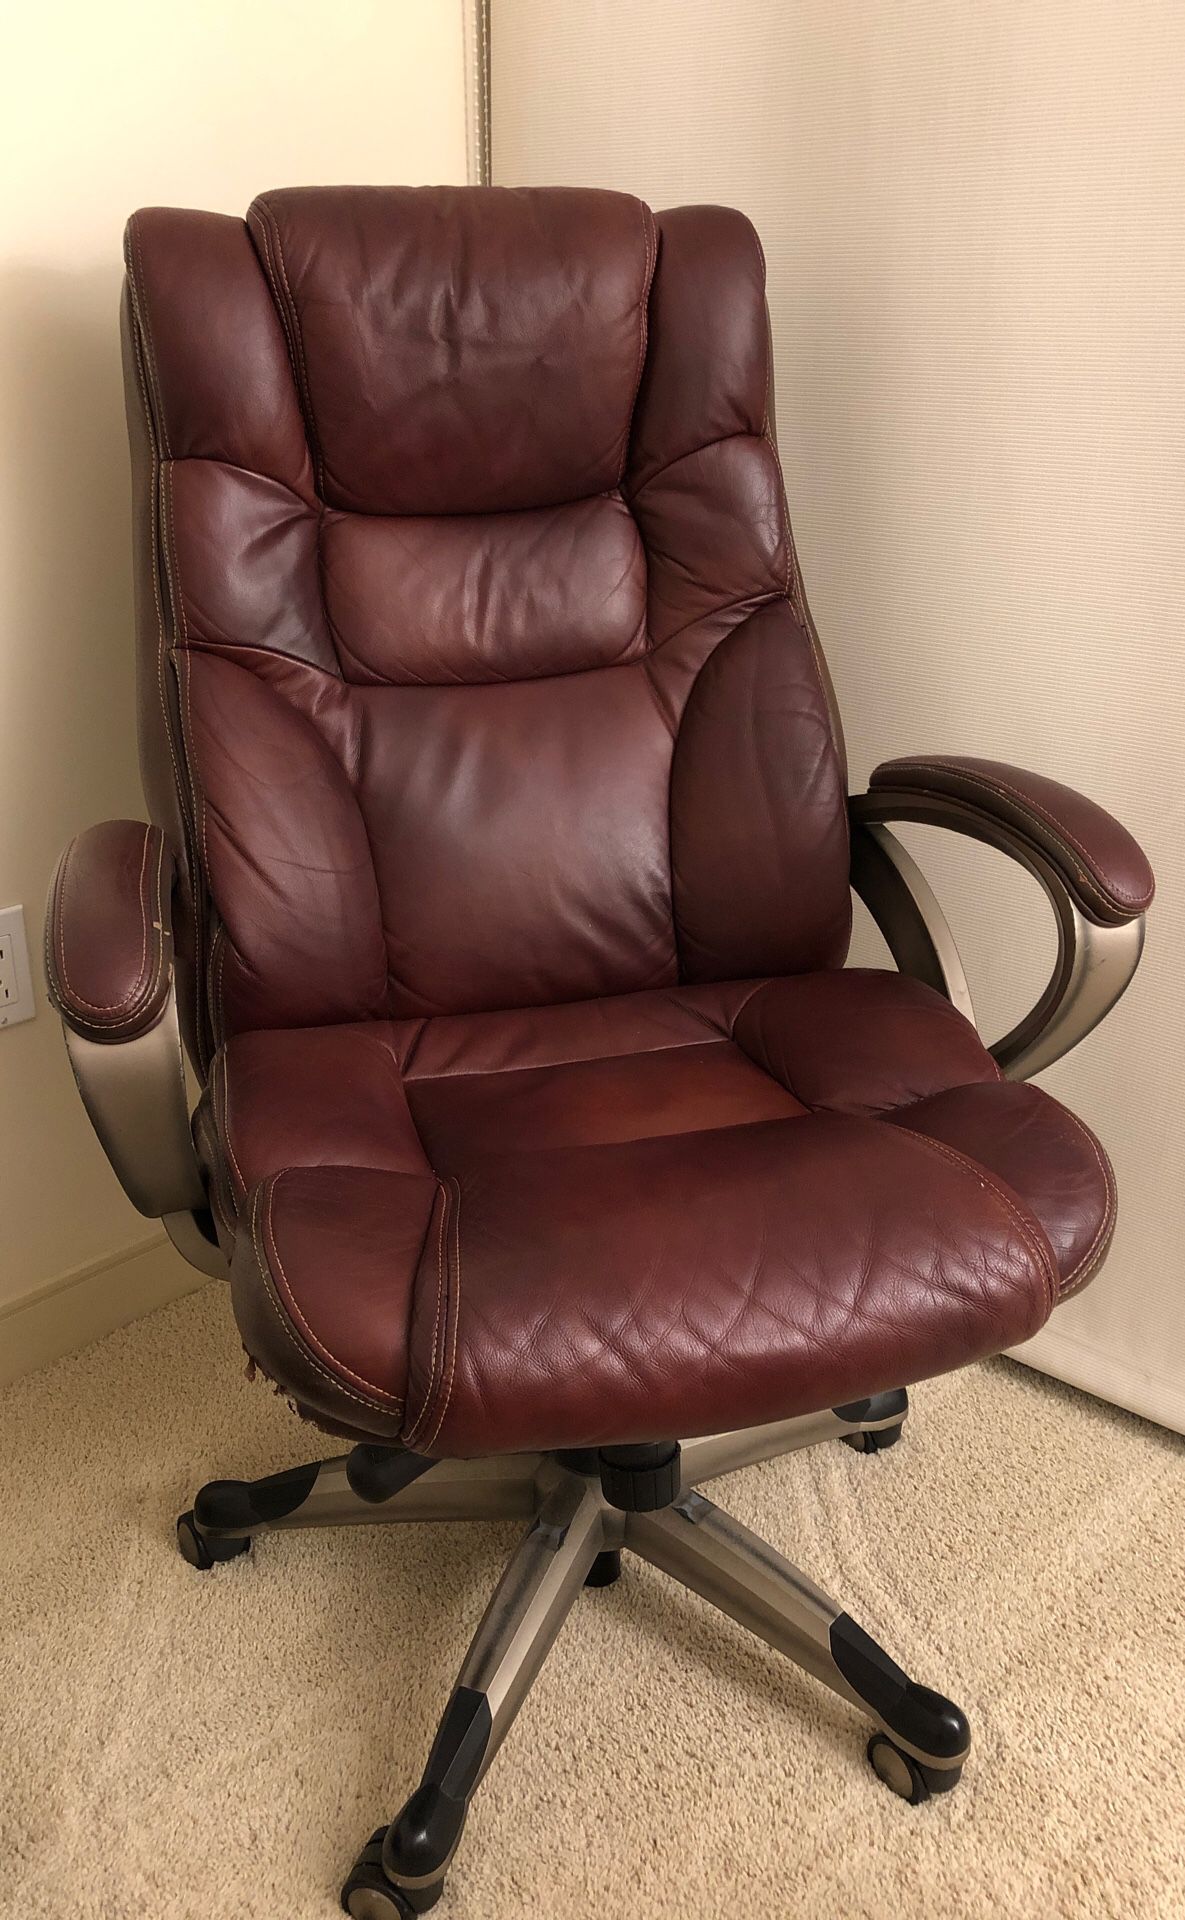 Broyhill Giannelli Premium Leather Executive Chair